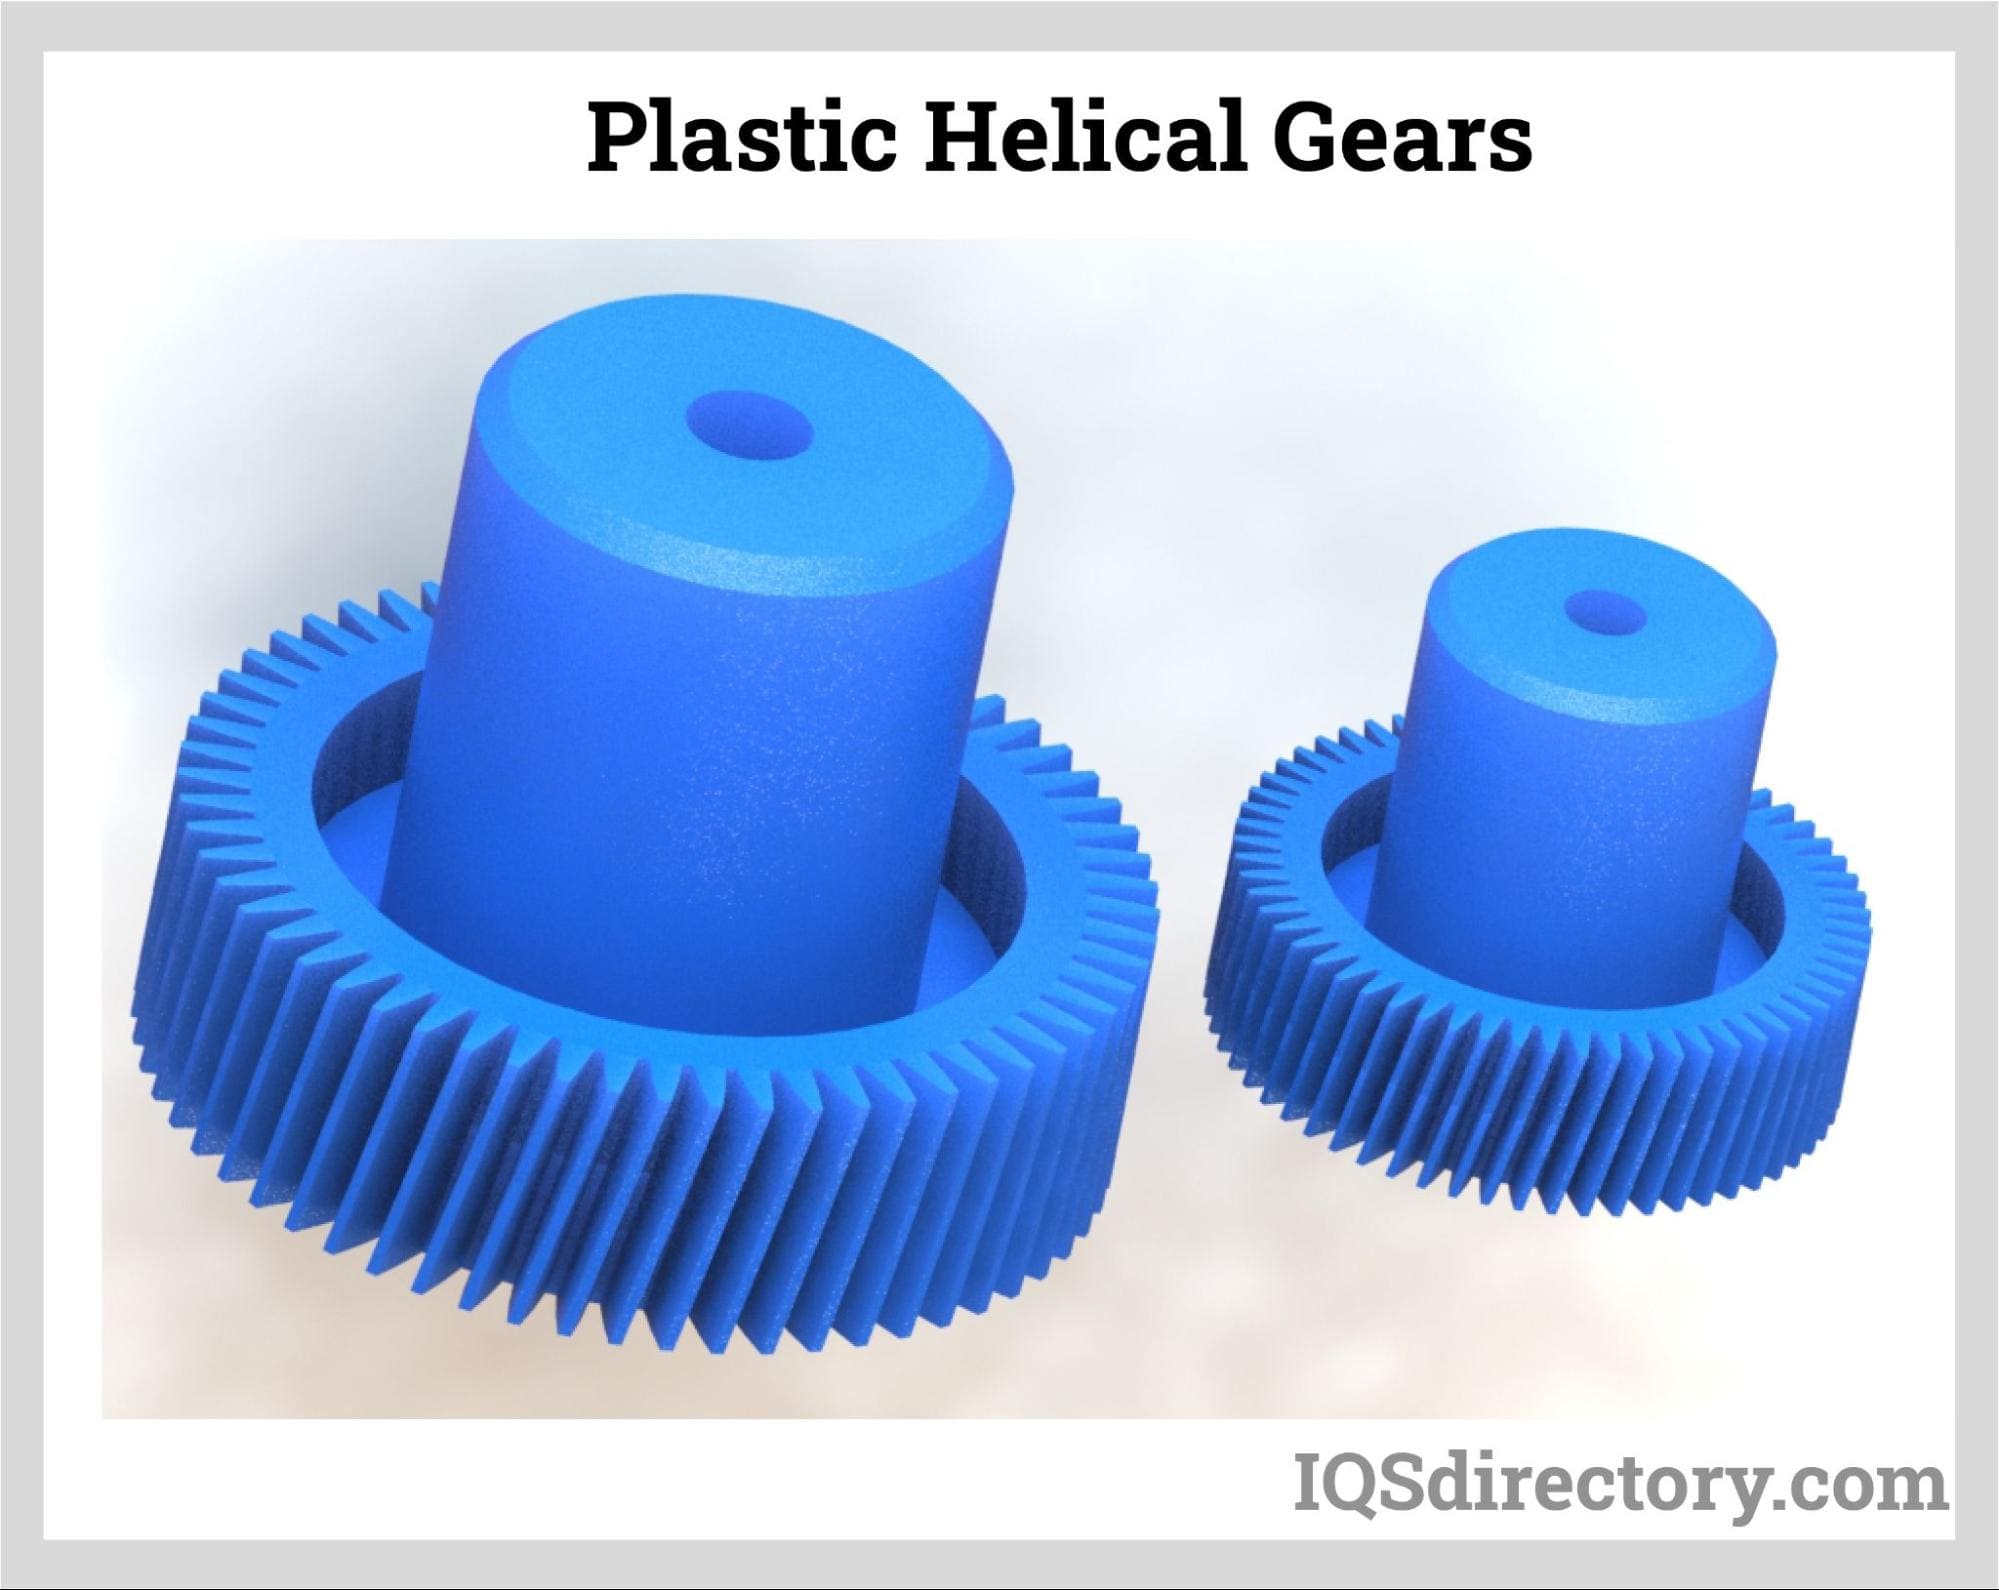 Plastic Helical Gears